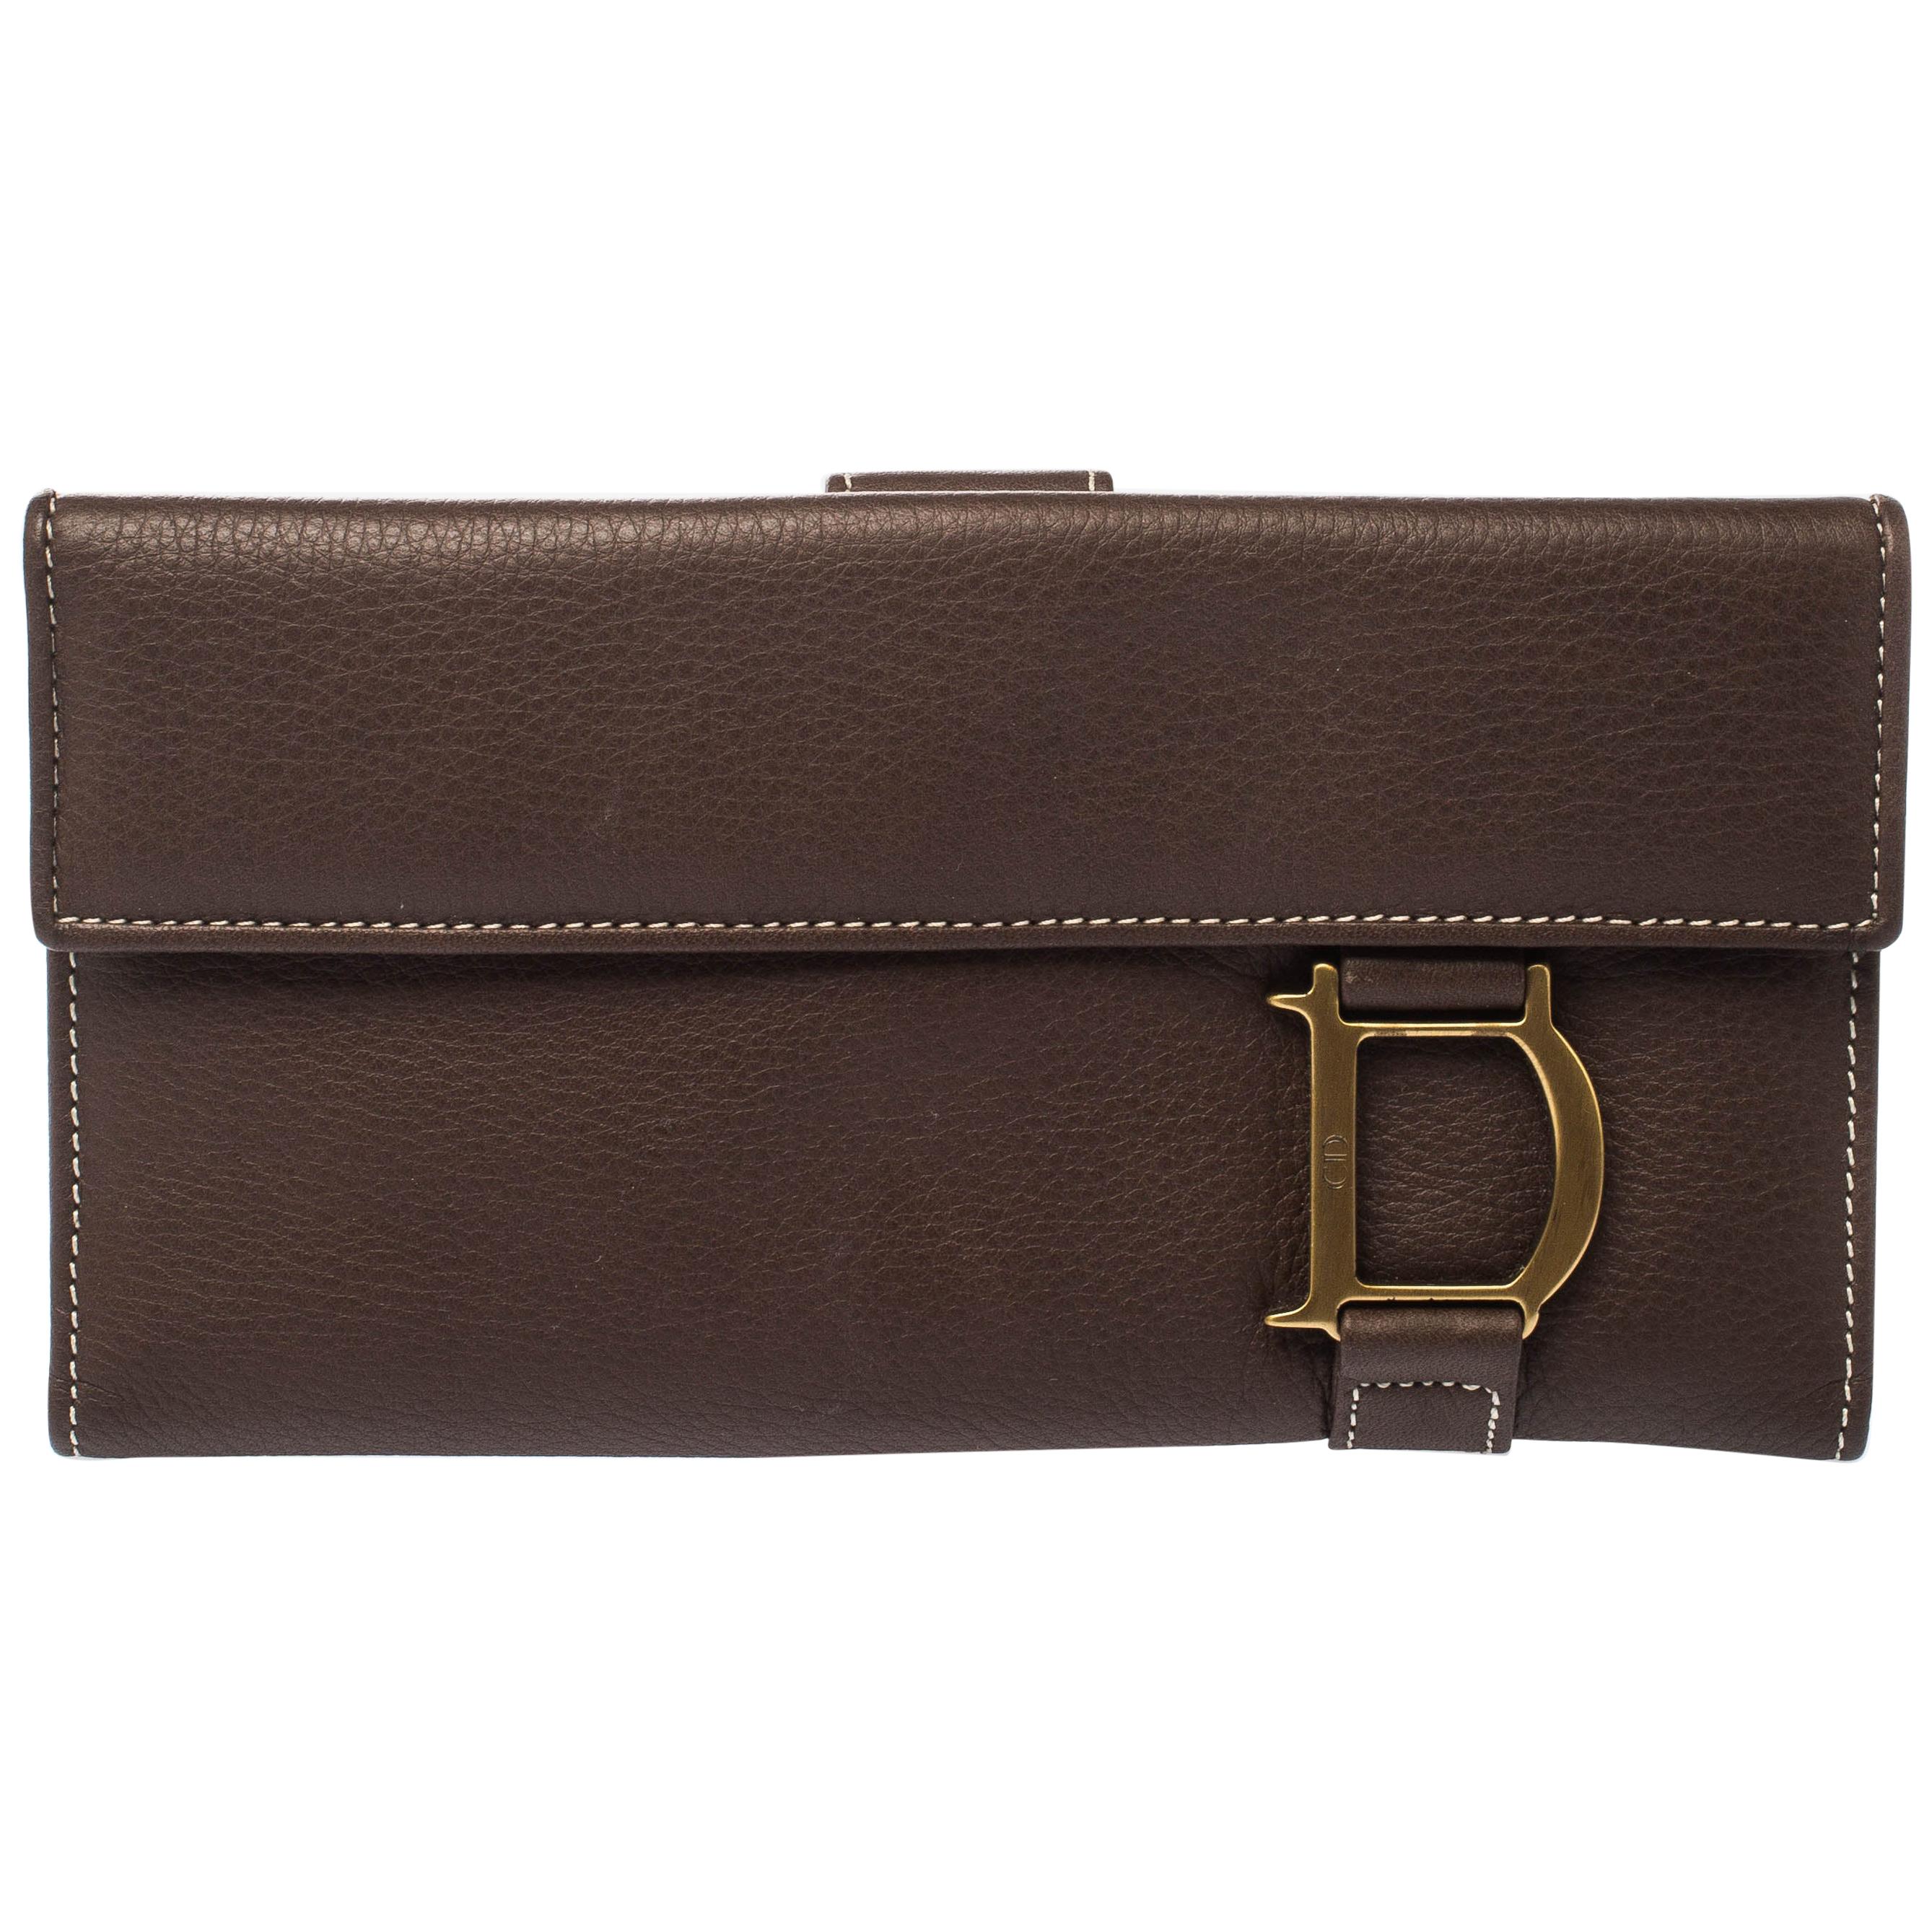 Dior Brown Leather Long Flap Wallet